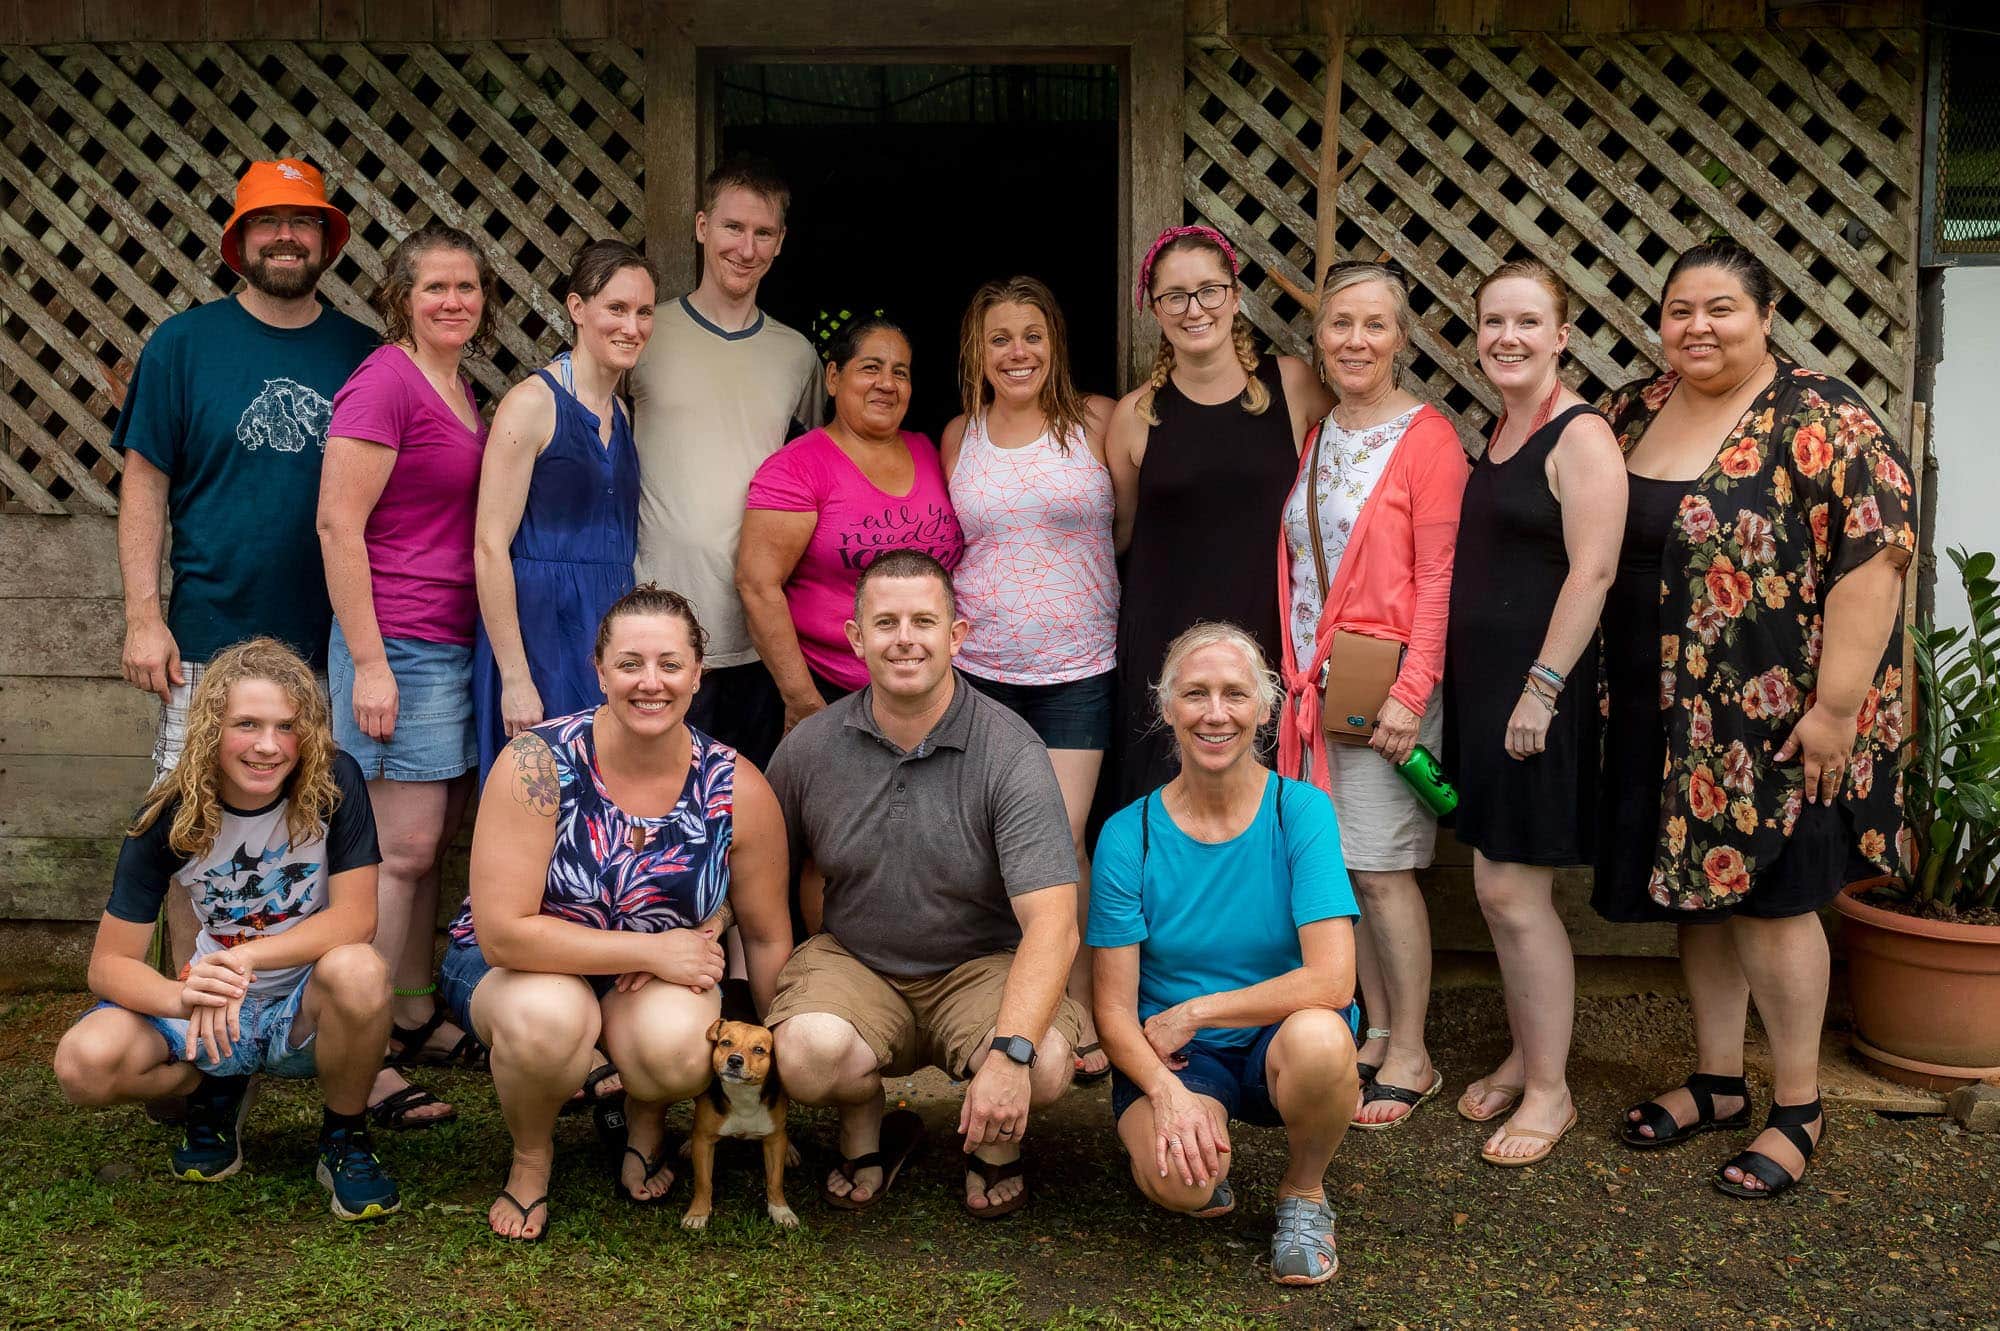 The wedding party with the local Costa Rican woman who welcomed them to her home